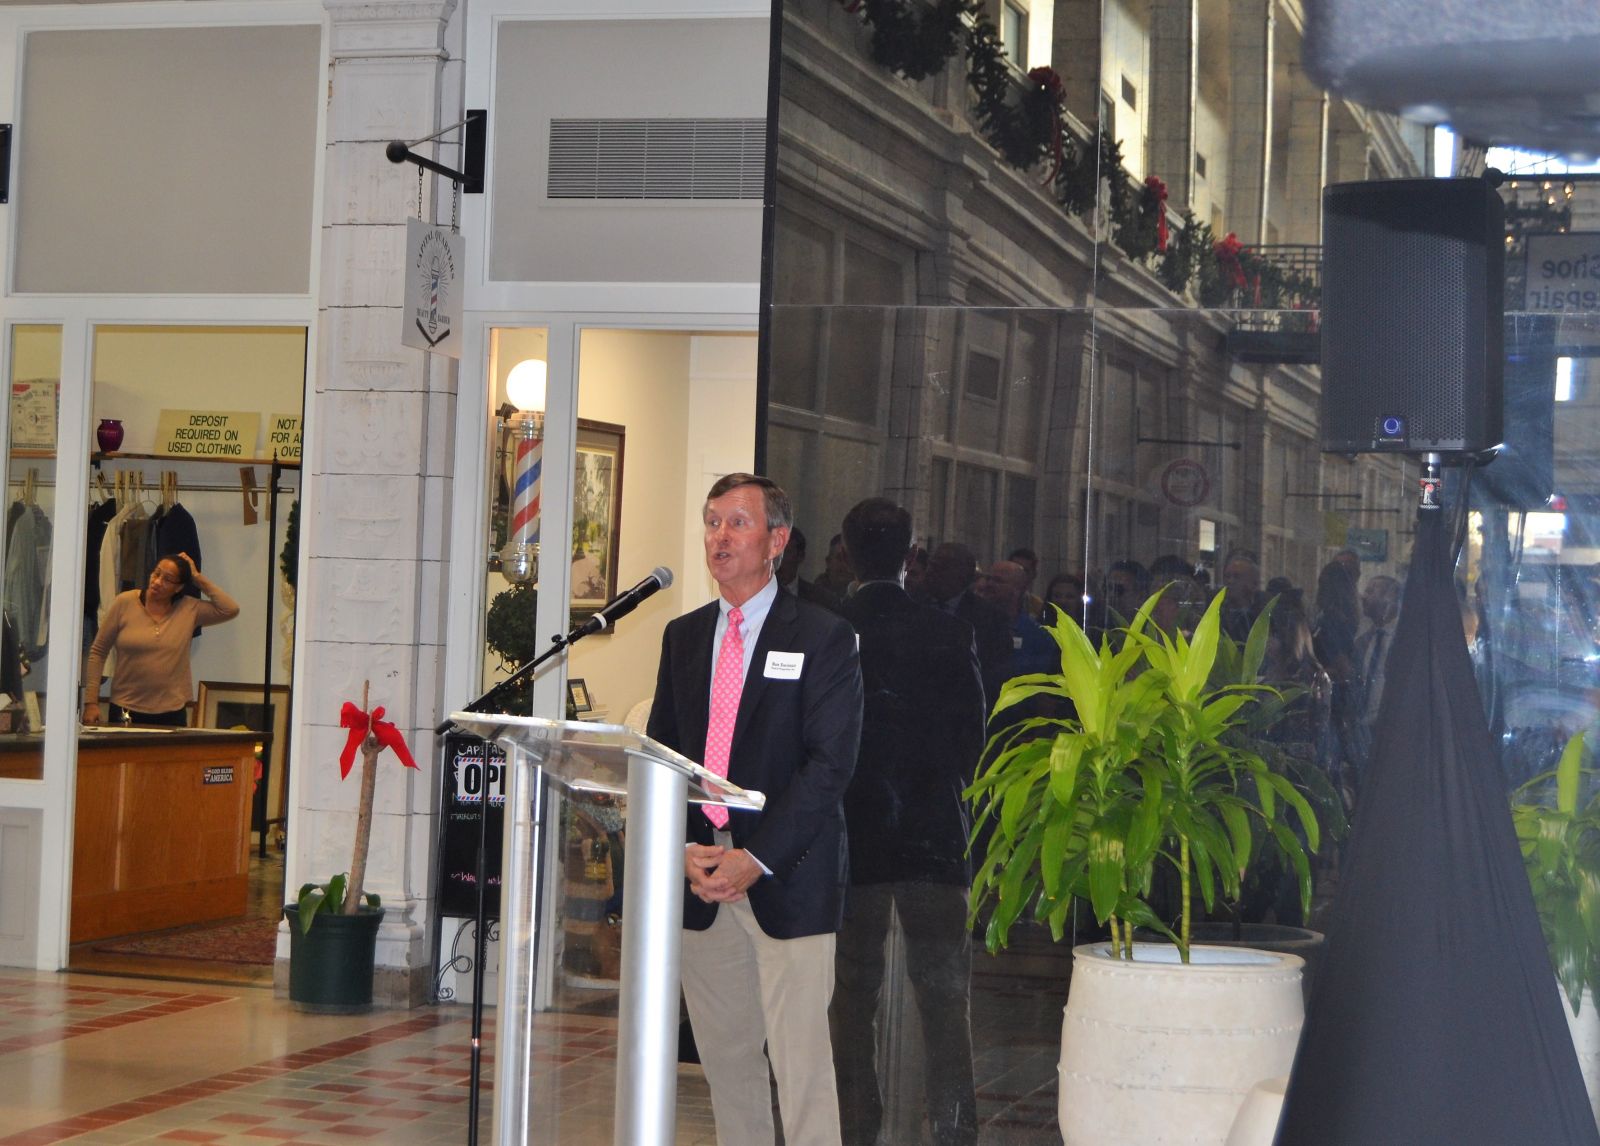 Developer and co-owner of the Arcade Mall Ron Swinson addresses a crowd at the building's re-grand opening celebration on Monday. (Photo/Melinda Waldrop)